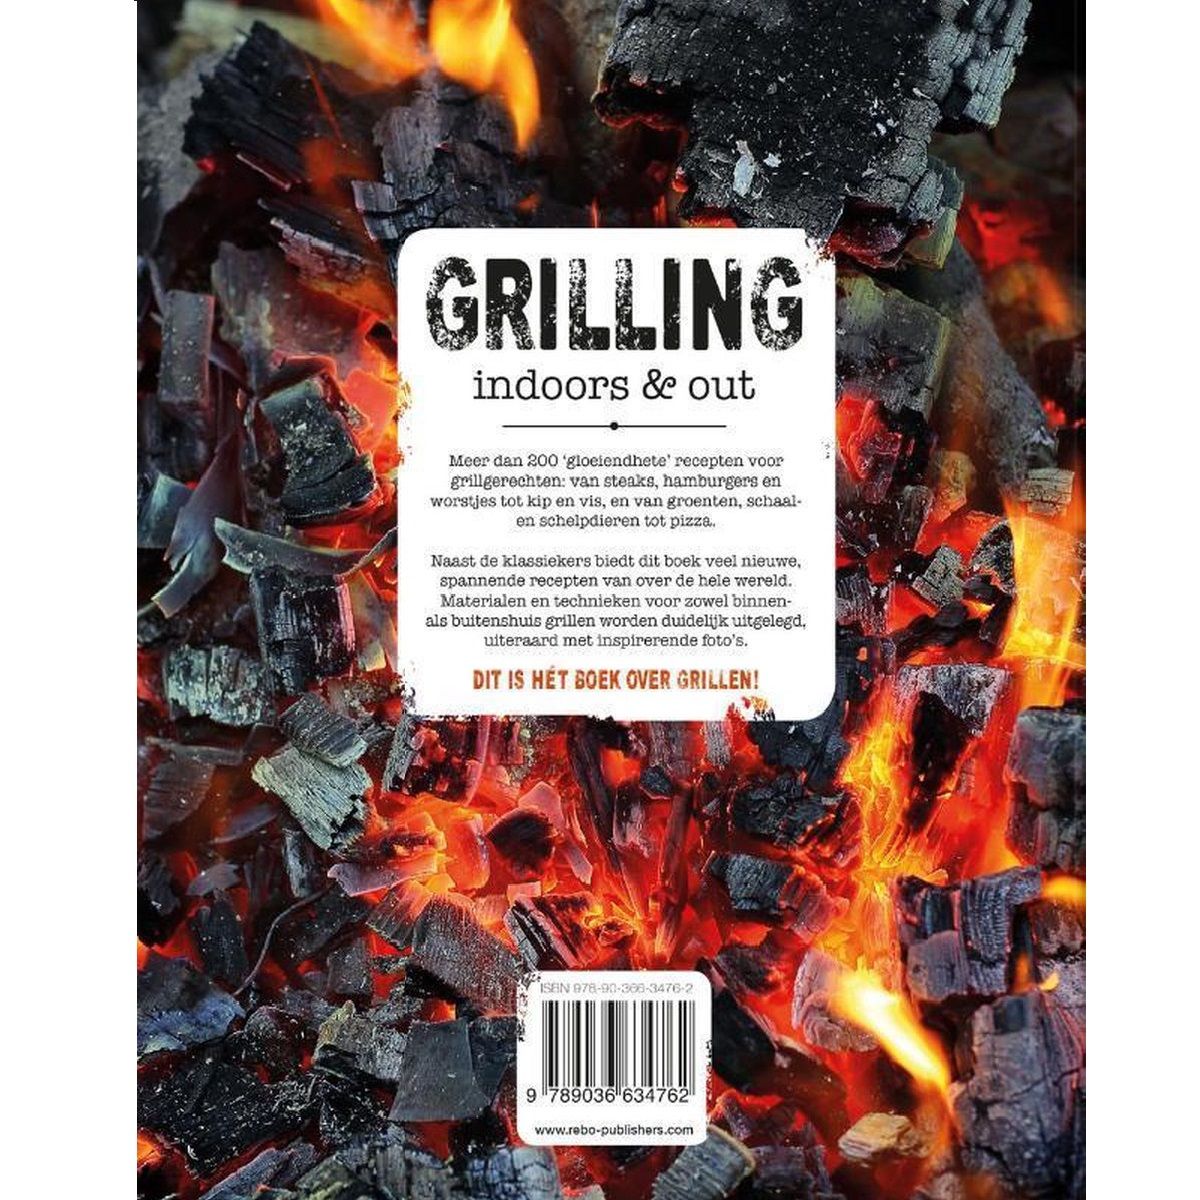 Grilling indoors & out